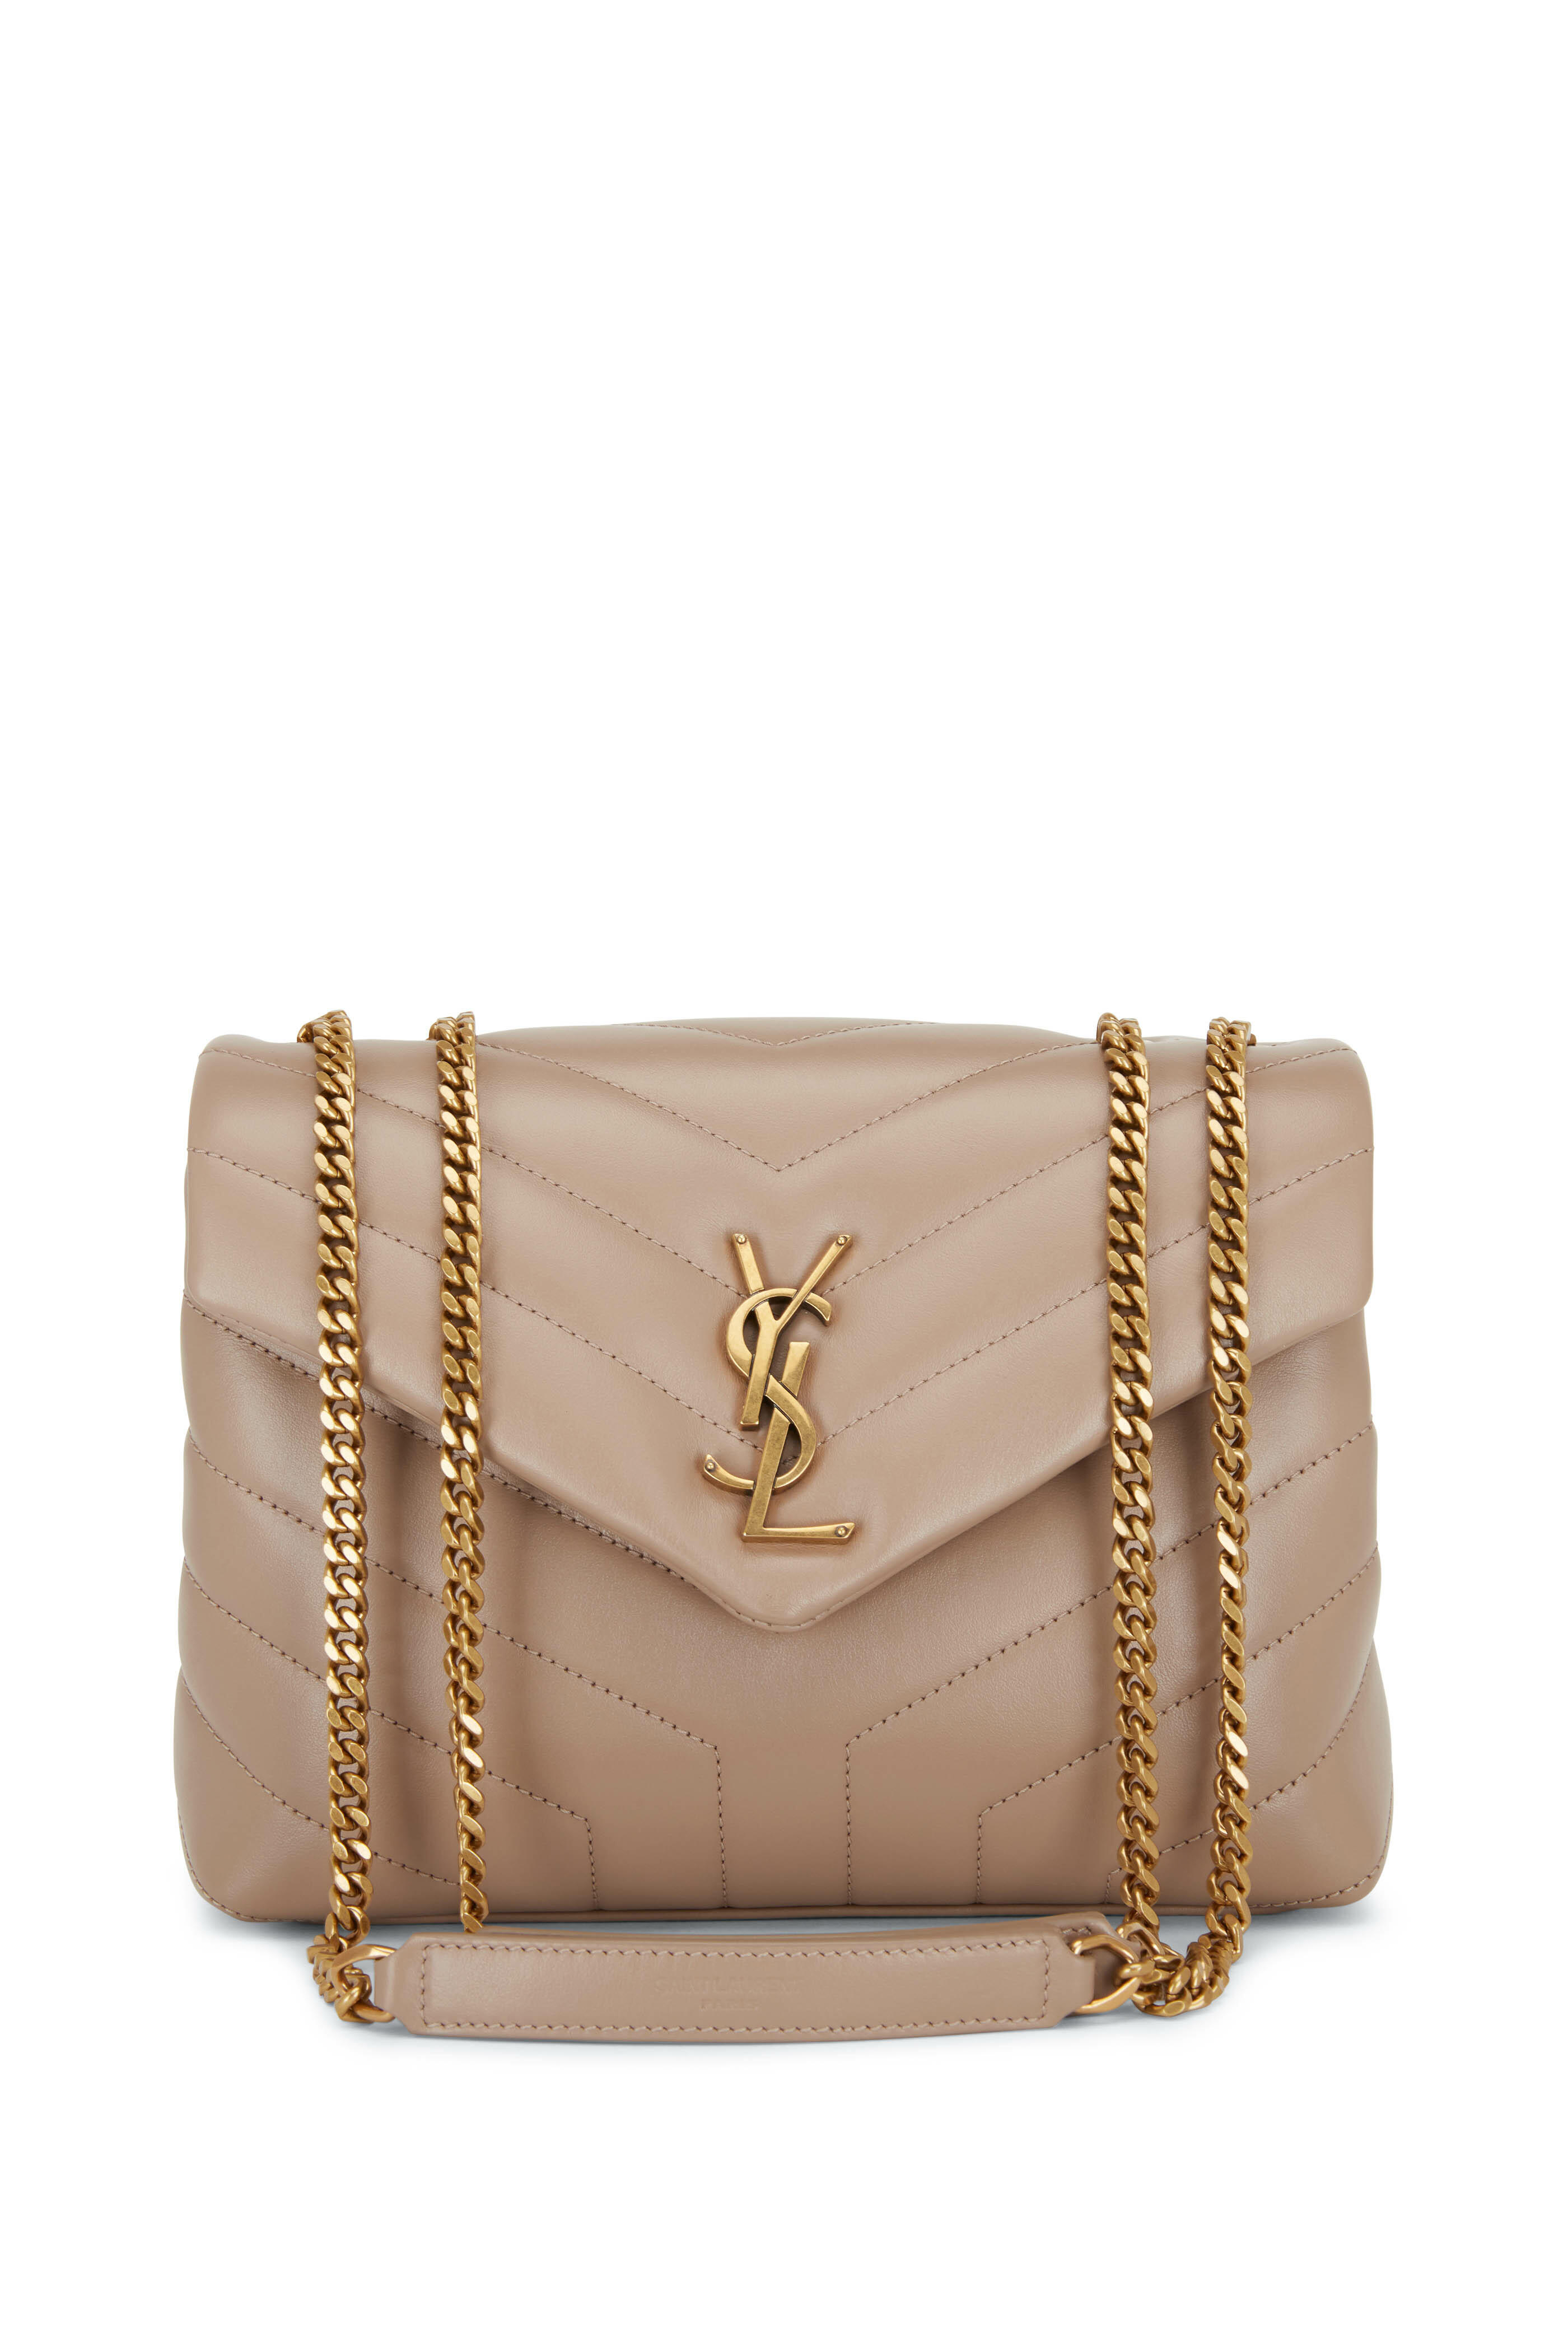 Loulou Quilted Leather YSL Bag